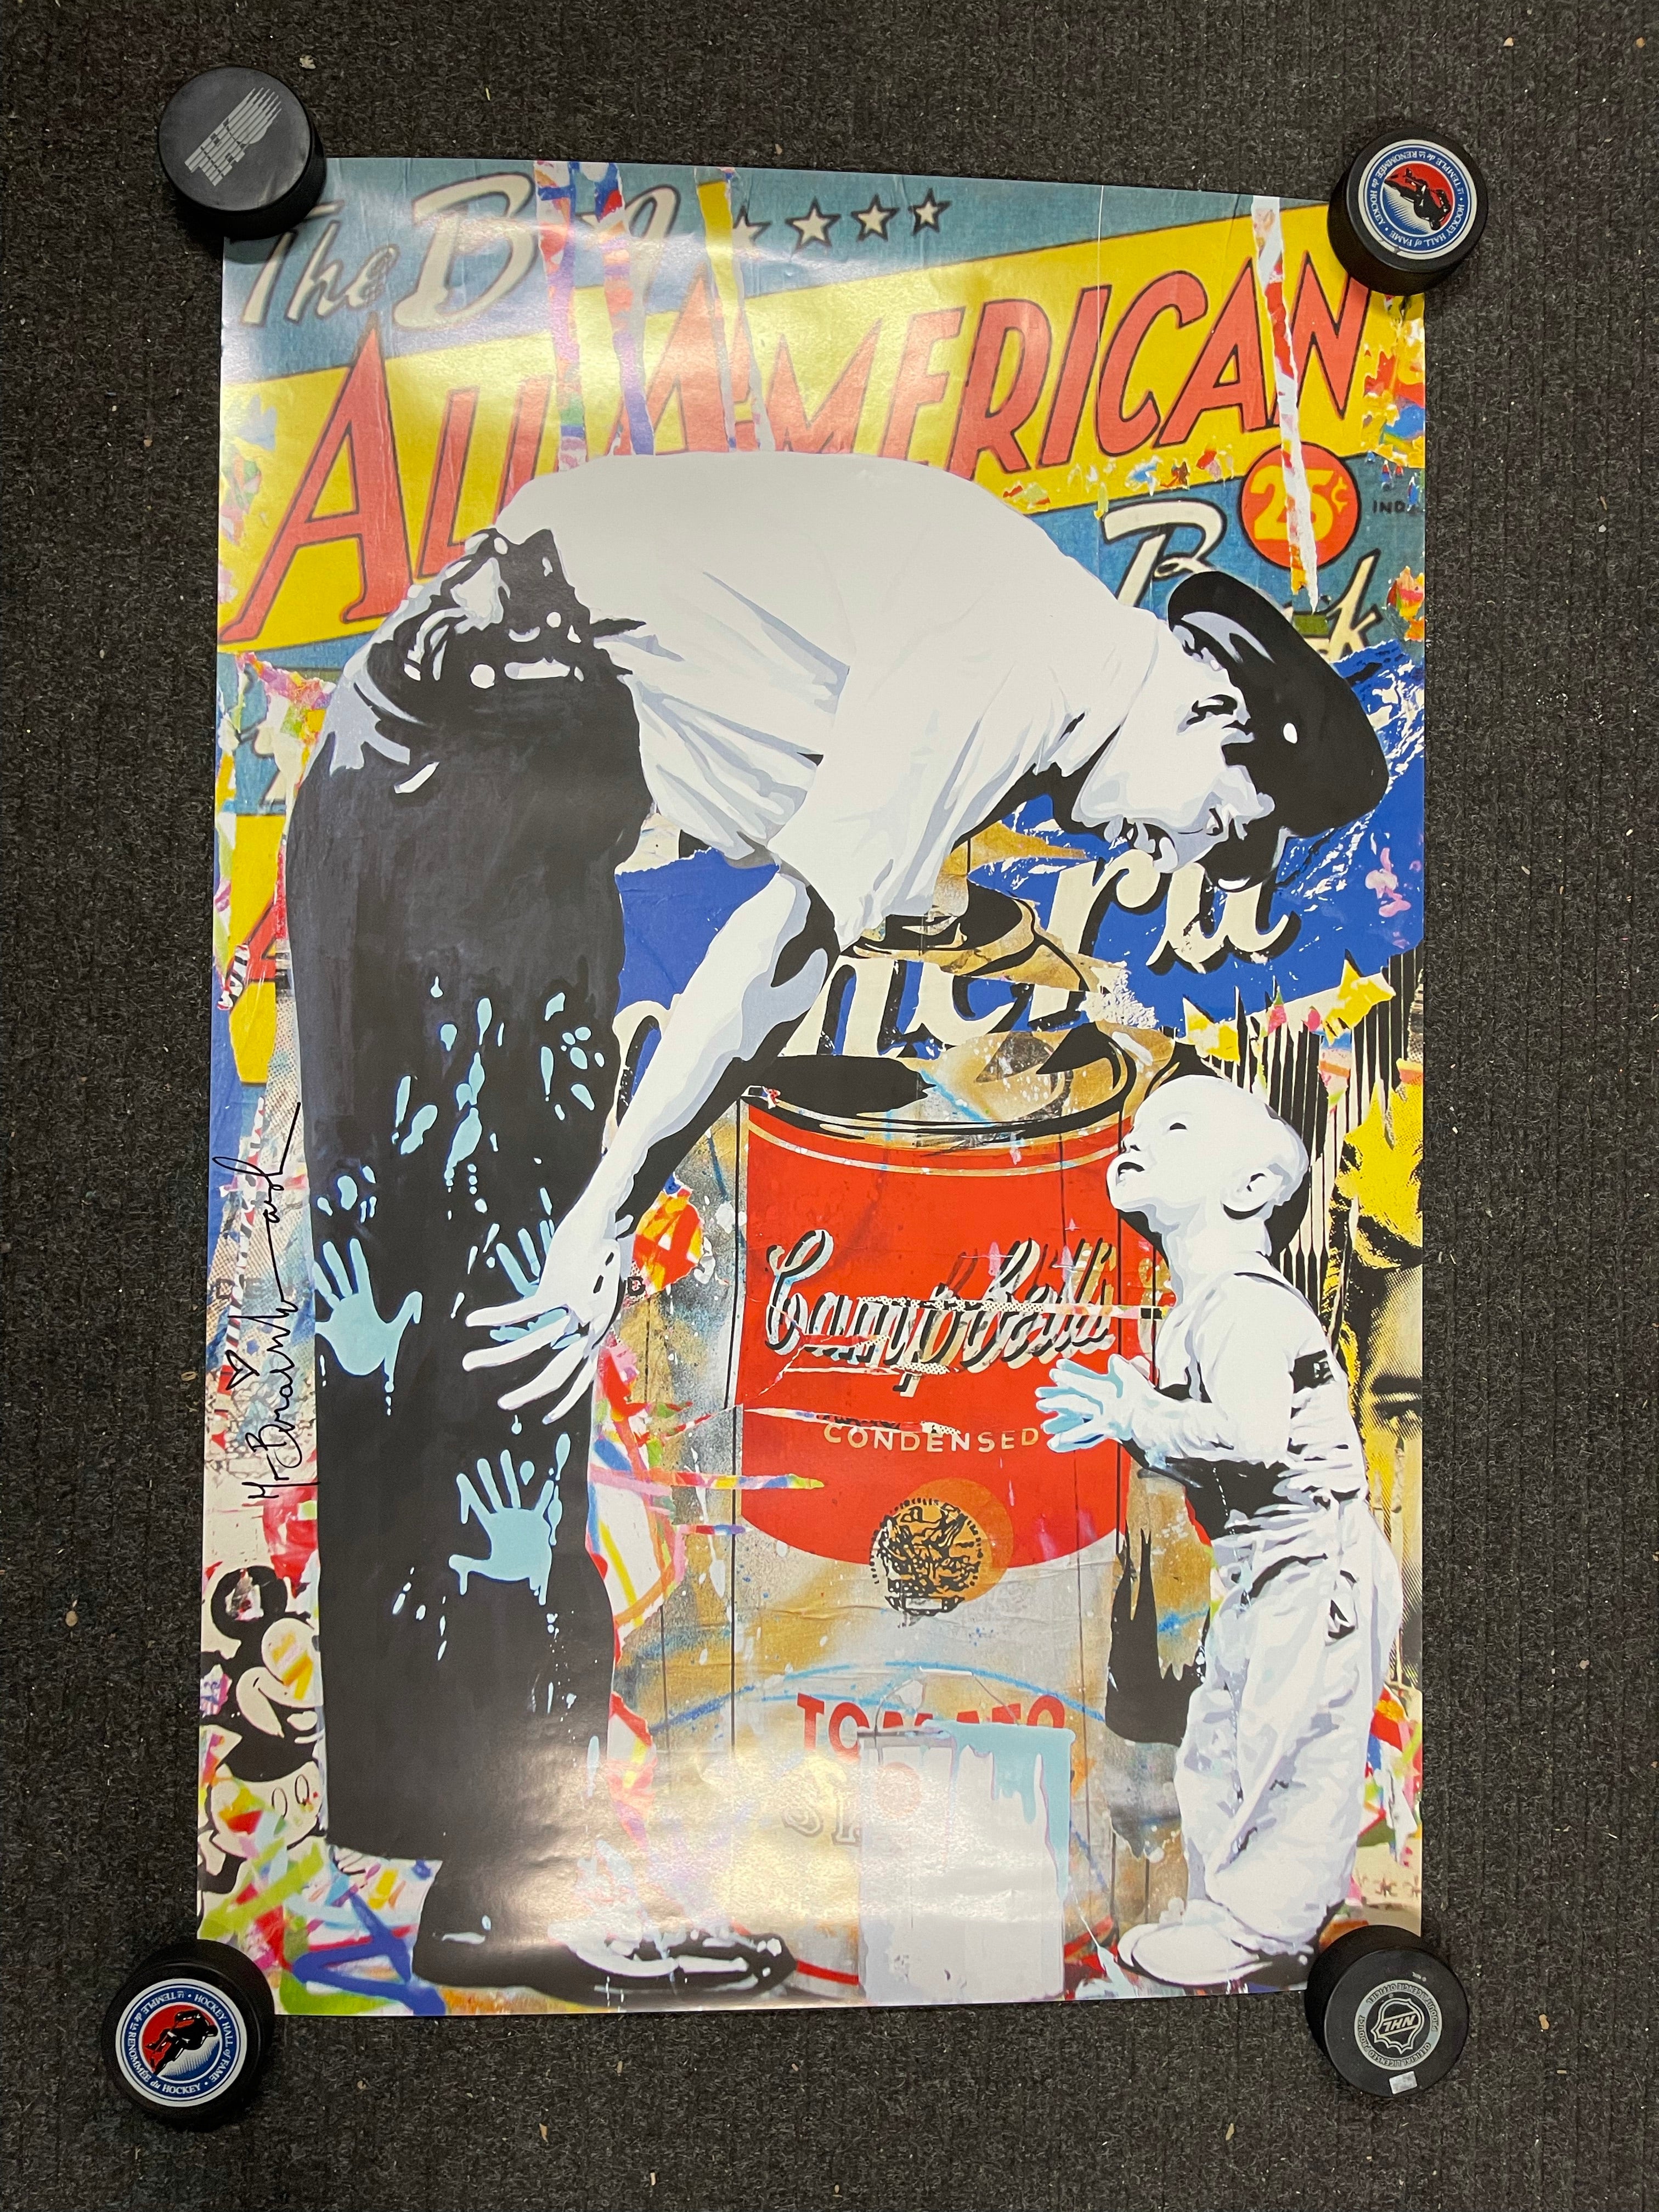 Mr. Brainwash (Banksy style) limited issued Graffiti poster "Campbells" 2011